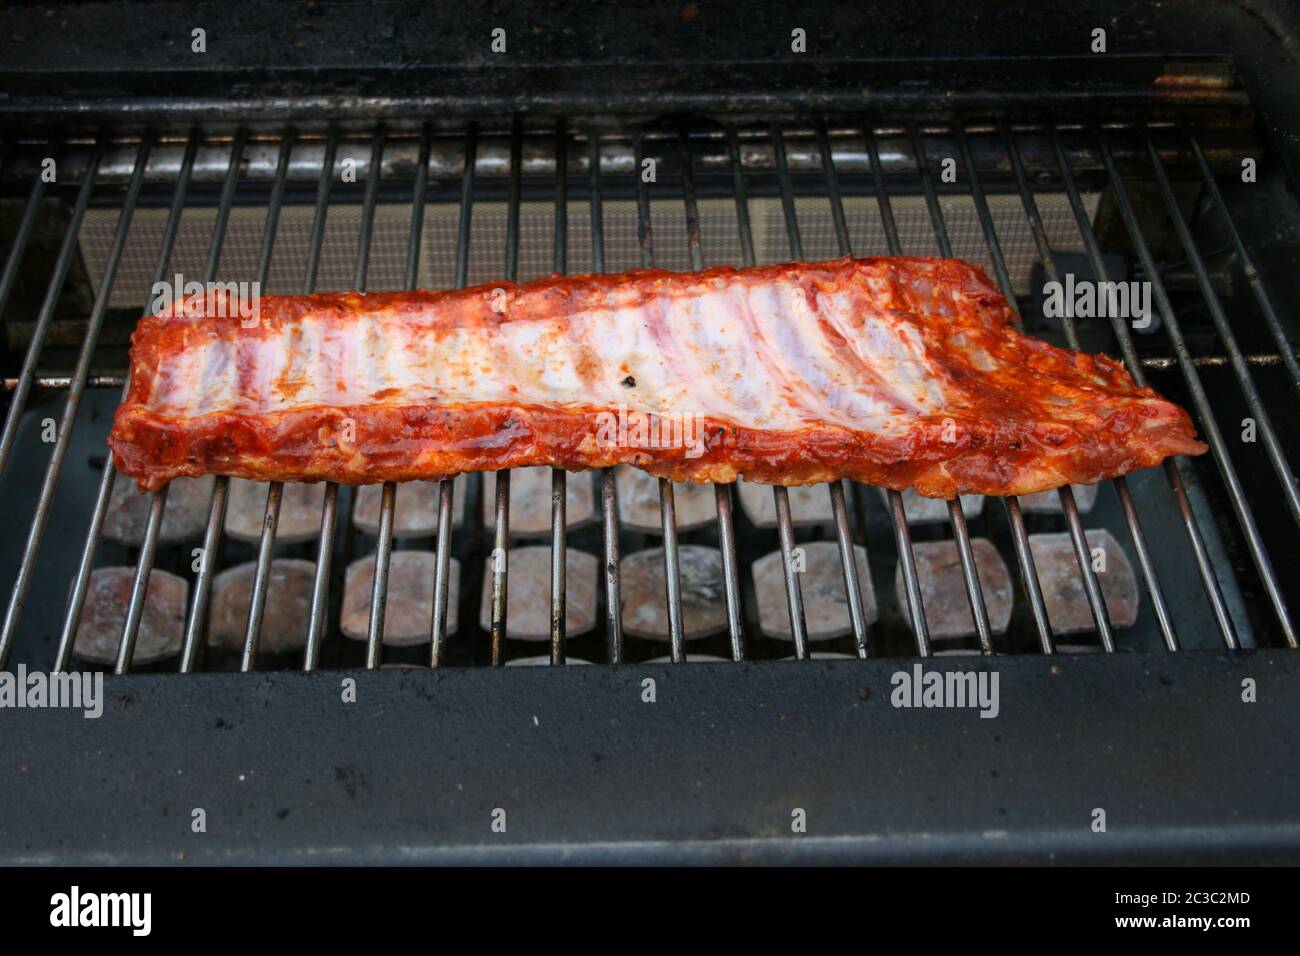 A large still raw piece of meat on a gas grill Stock Photo